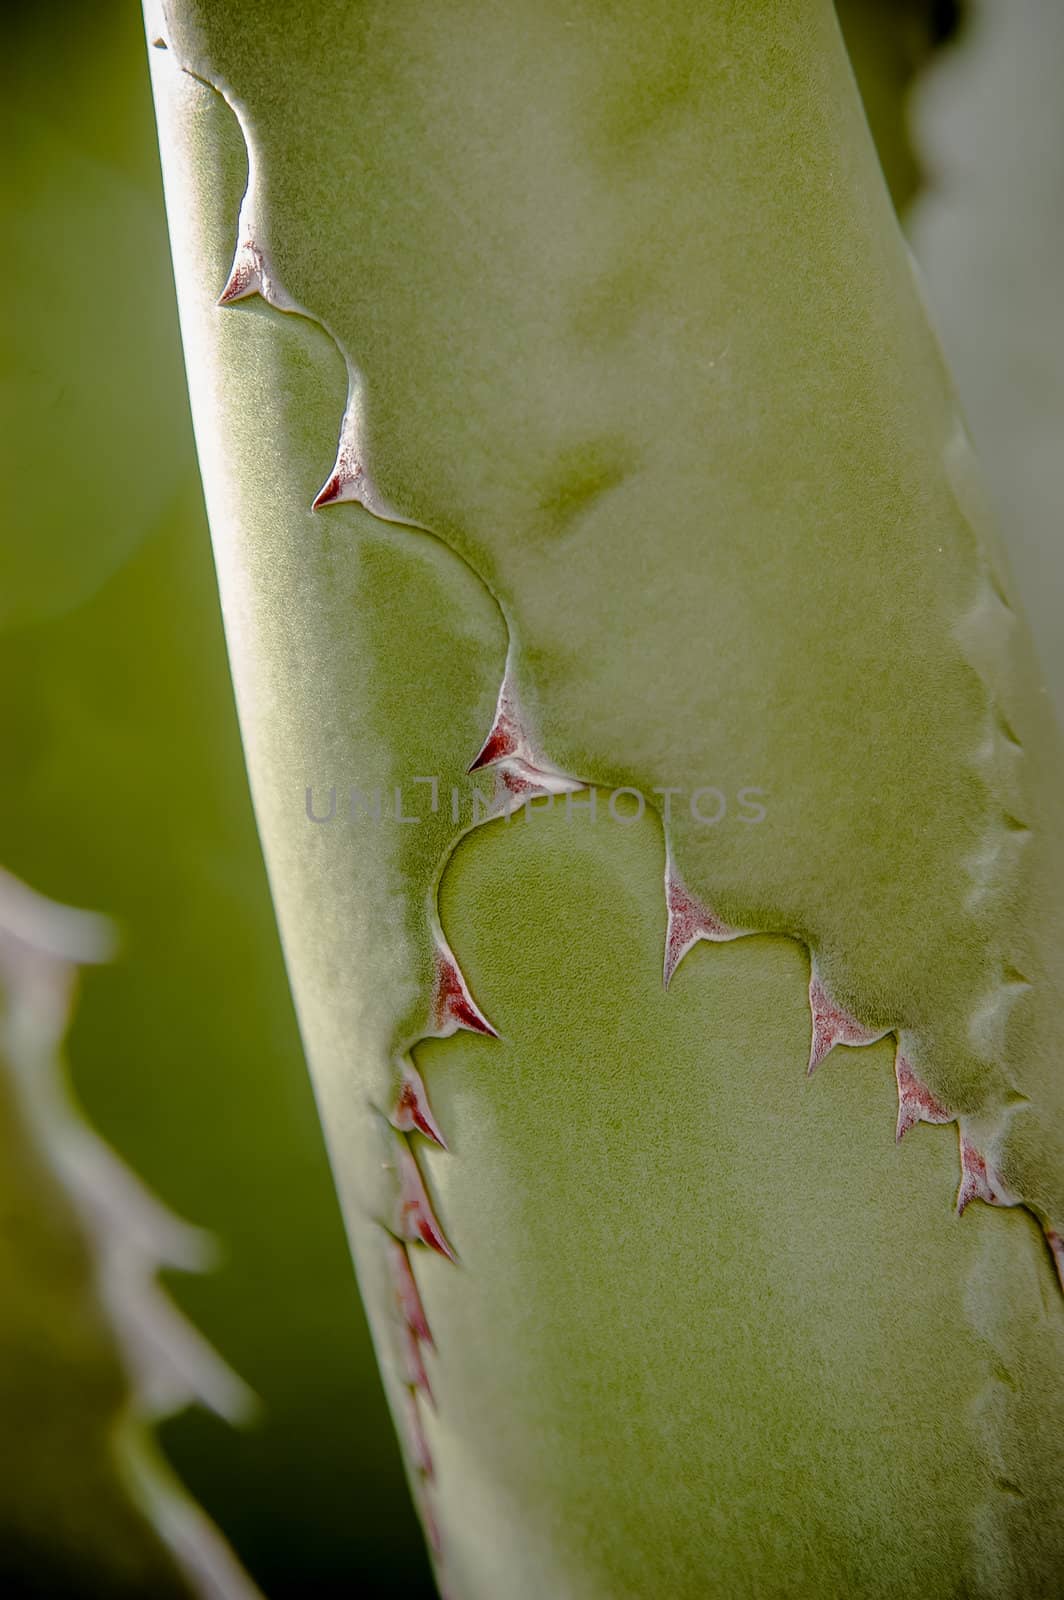 Agave cactus leaves folded, with thorns in a daylight